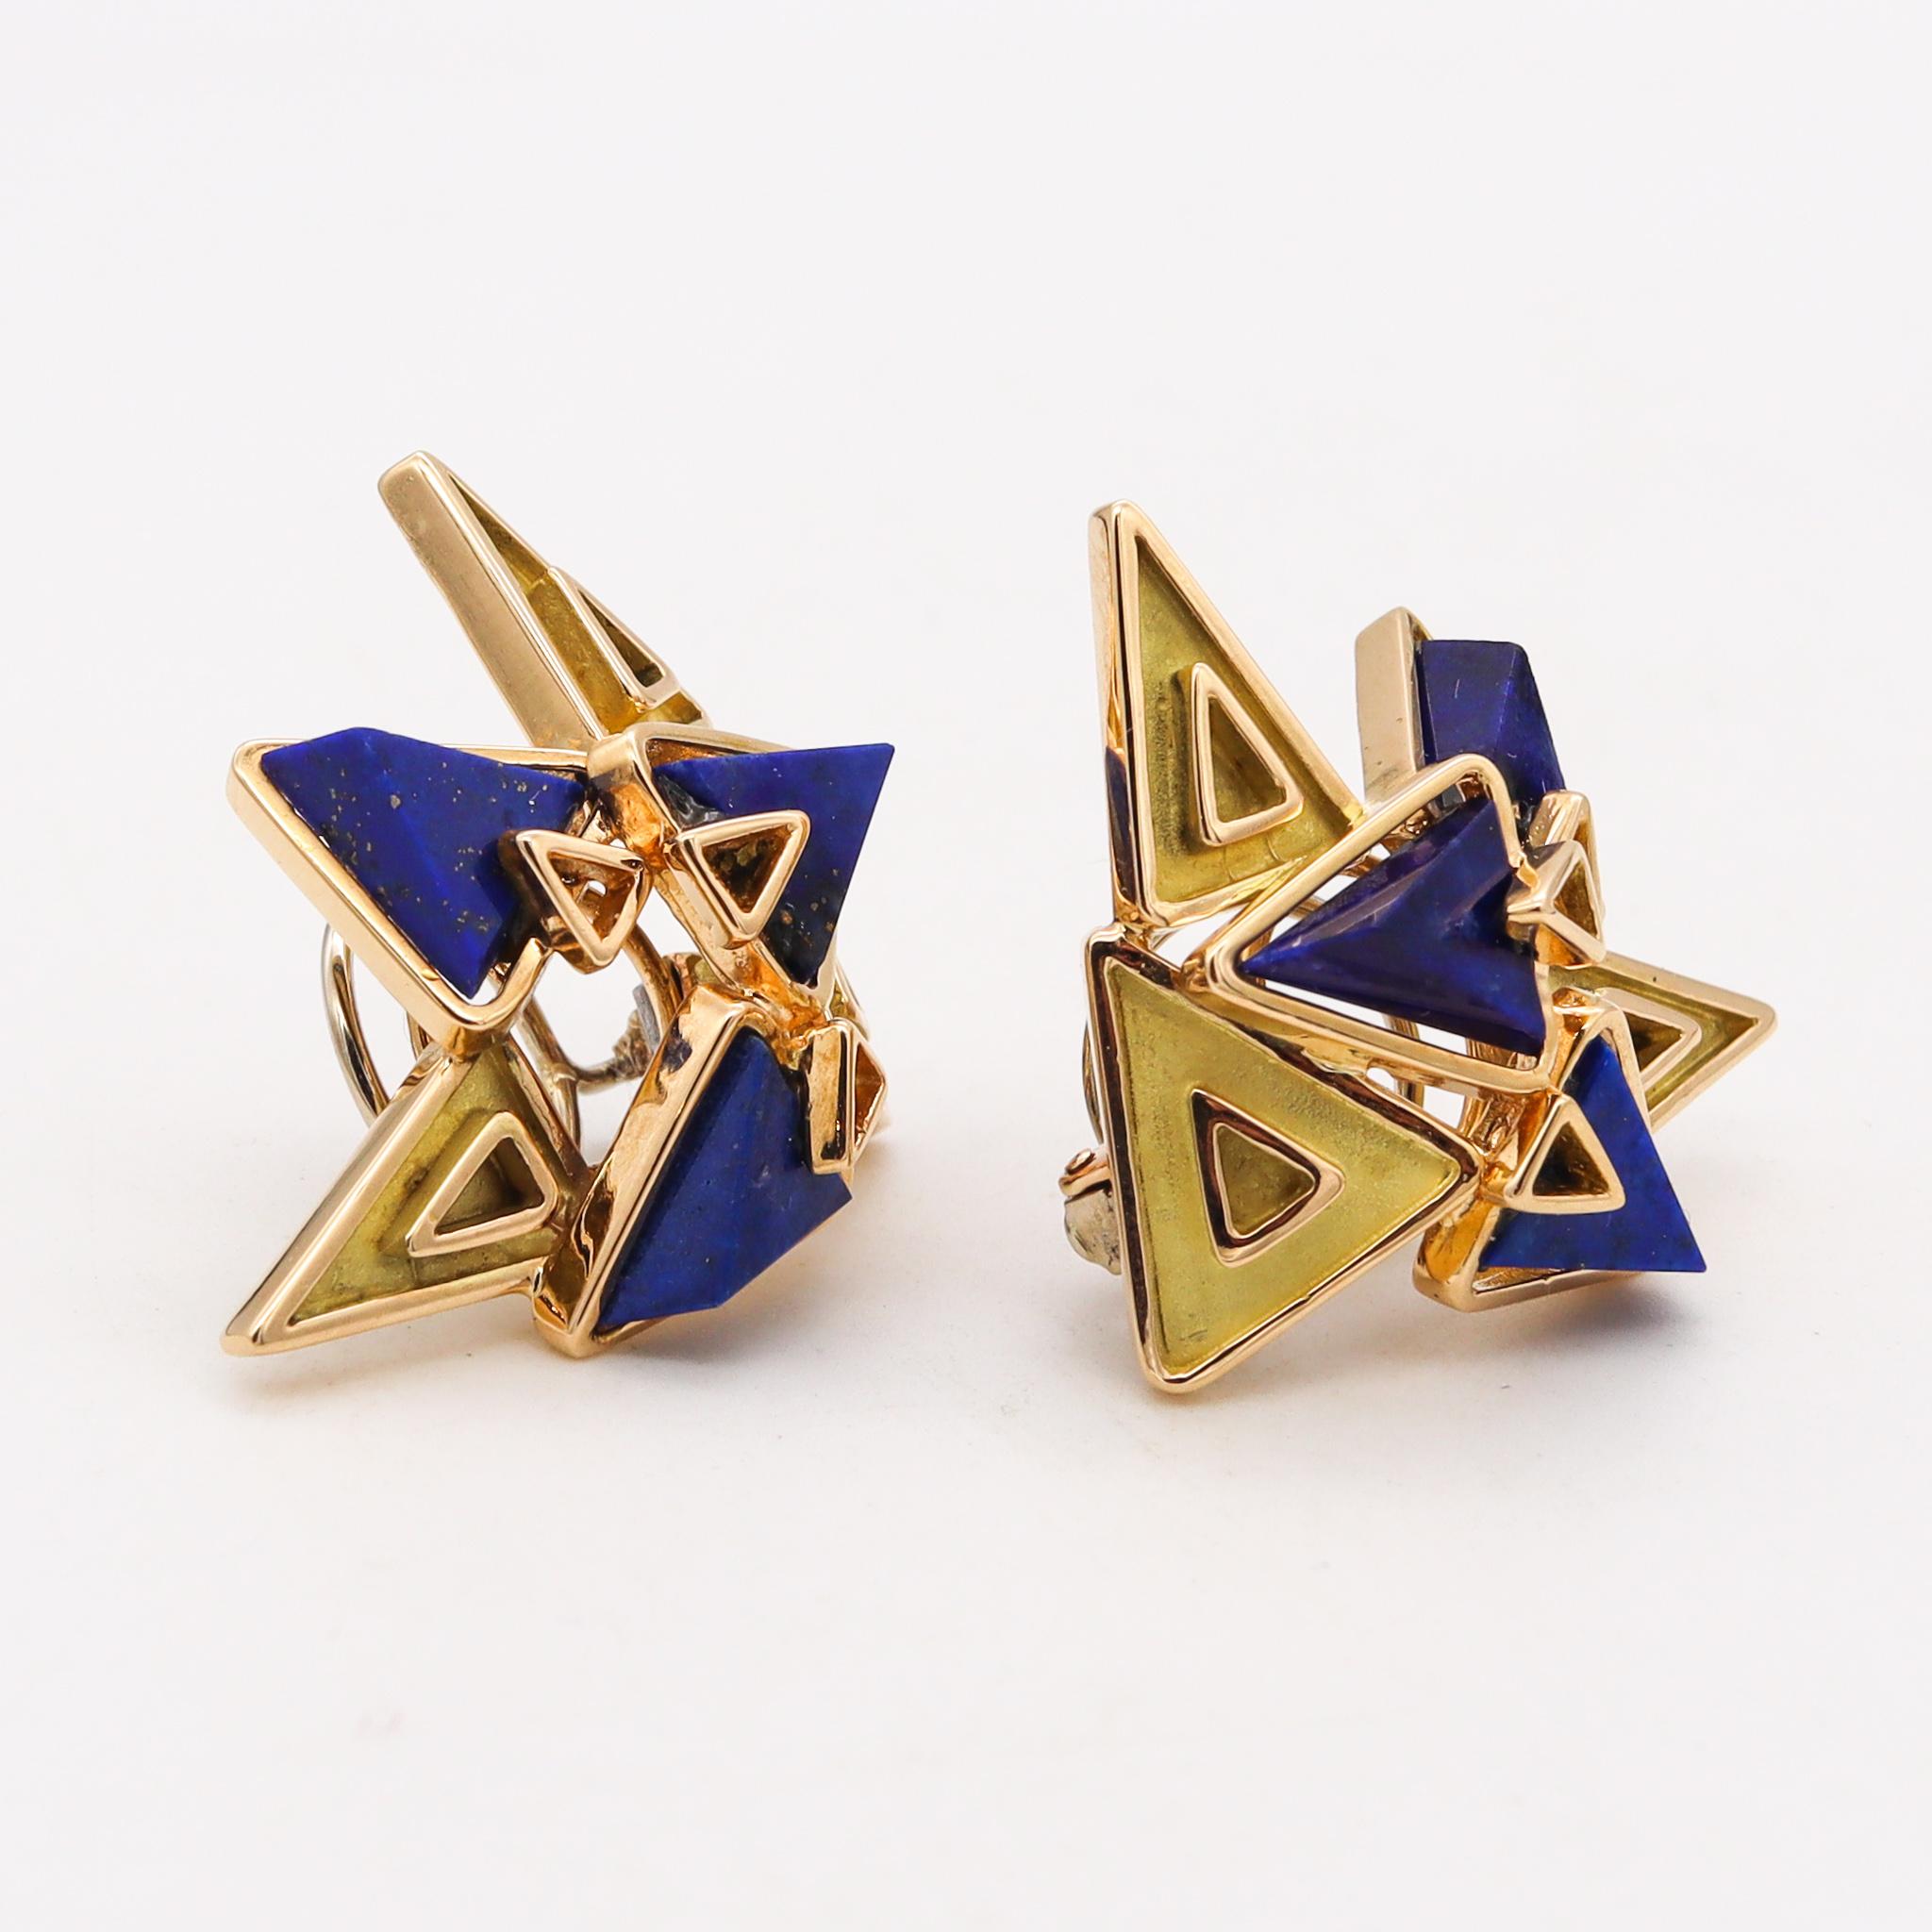 Modernist Chaumet Paris 1970 Rare Geometric Clip-on Earrings 18Kt Gold With Carved Lapis